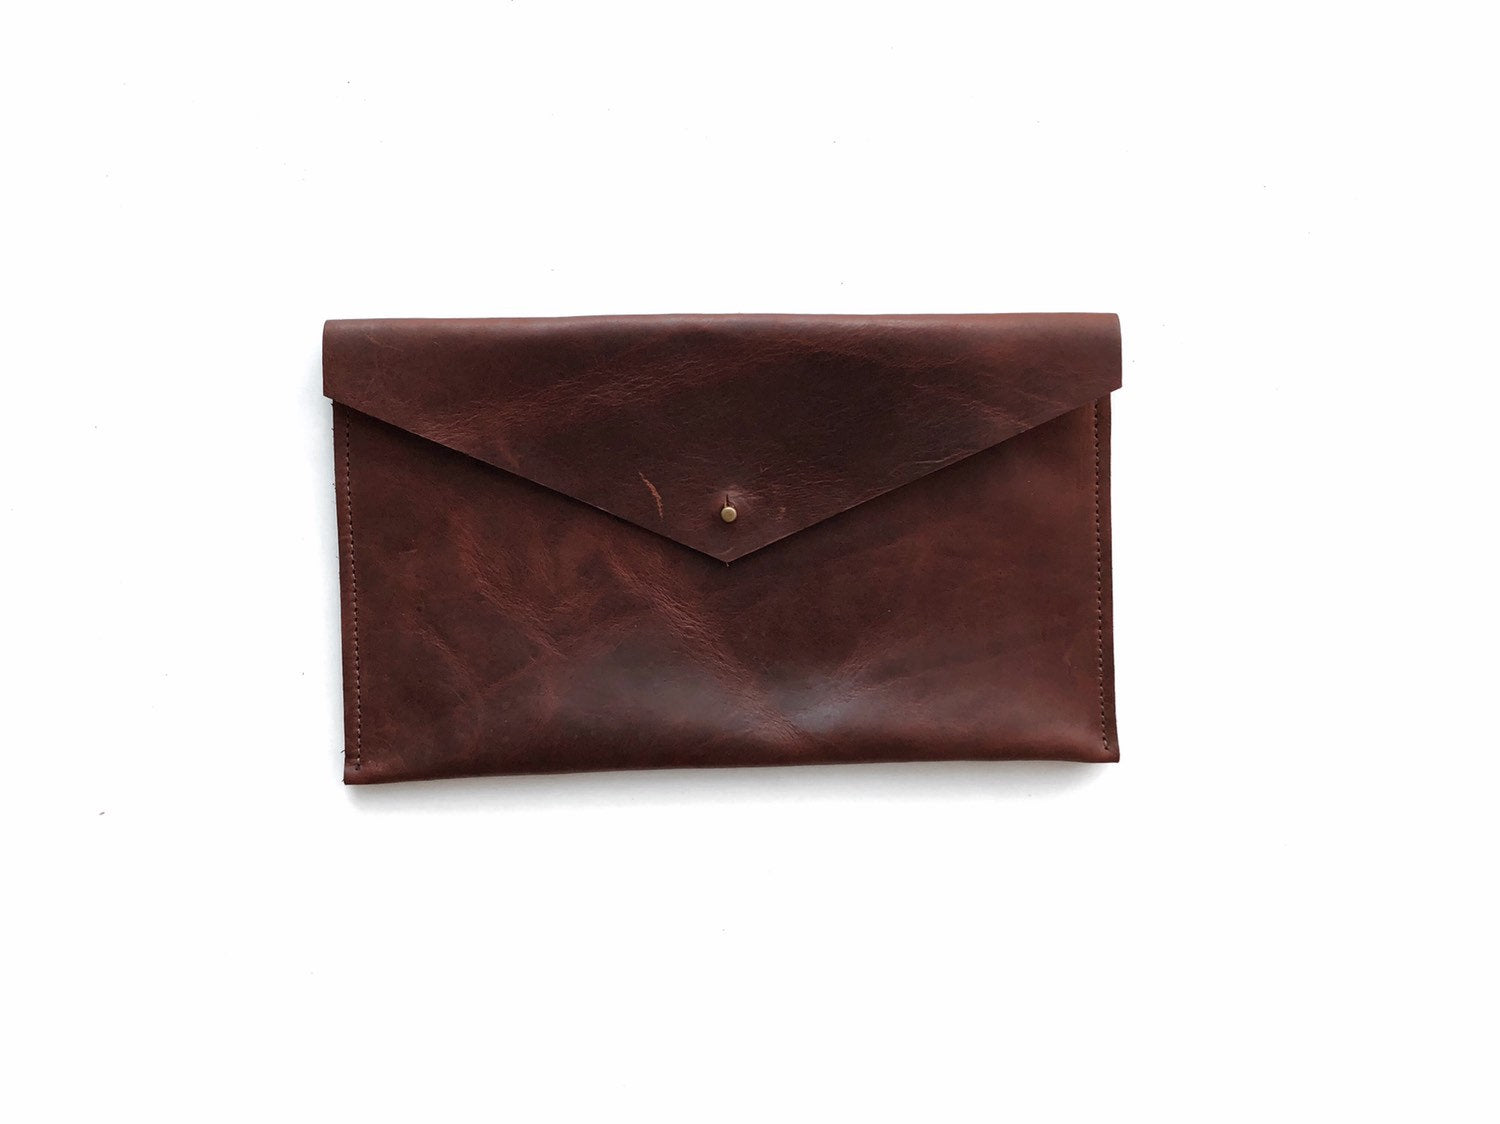 La Bagagerie French Brown Leather Envelope Bag Clutch Purse 9×6